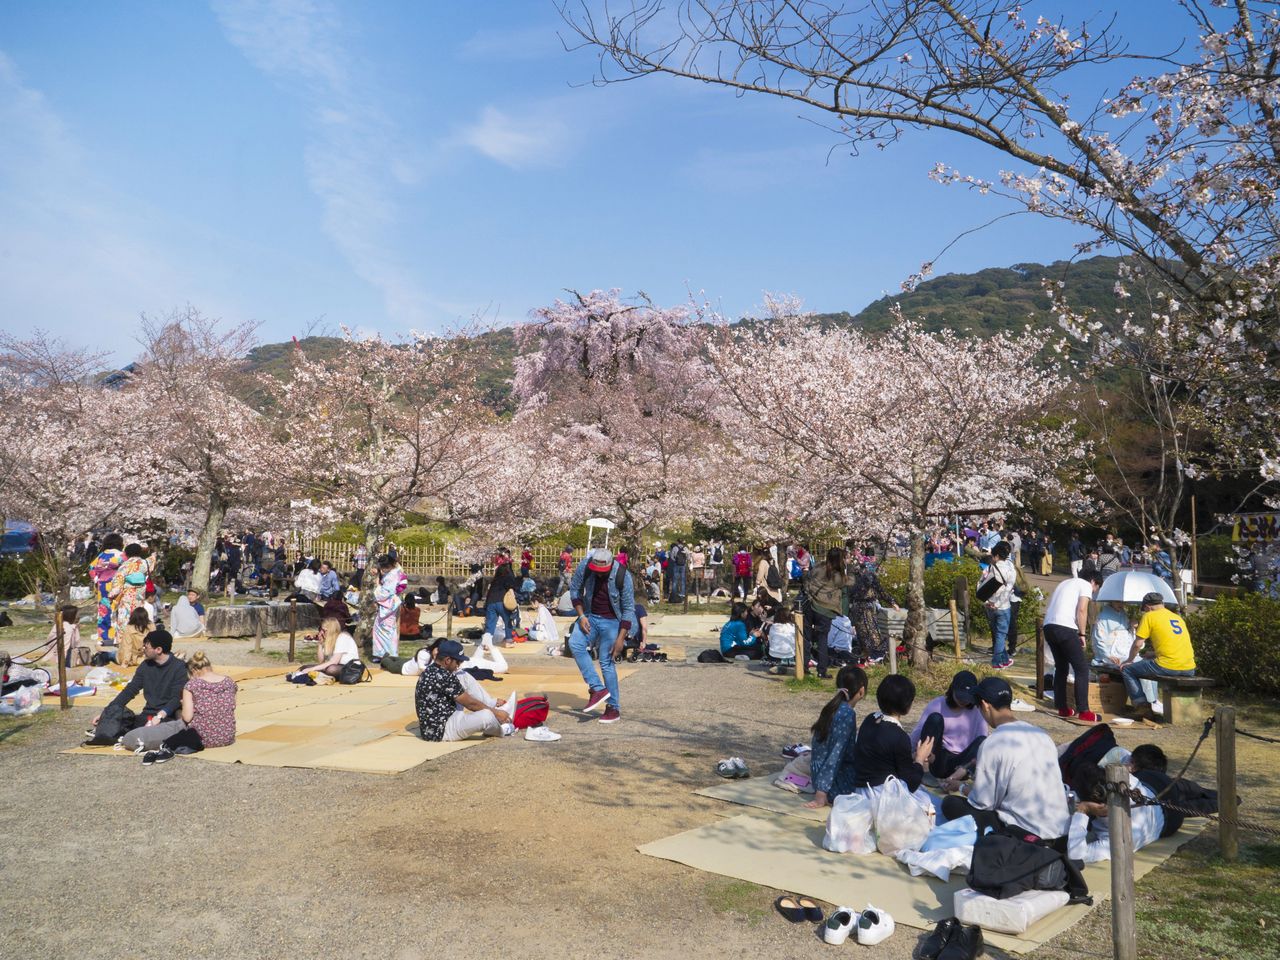 Maruyama Park is a favorite place for blossom-viewing parties.